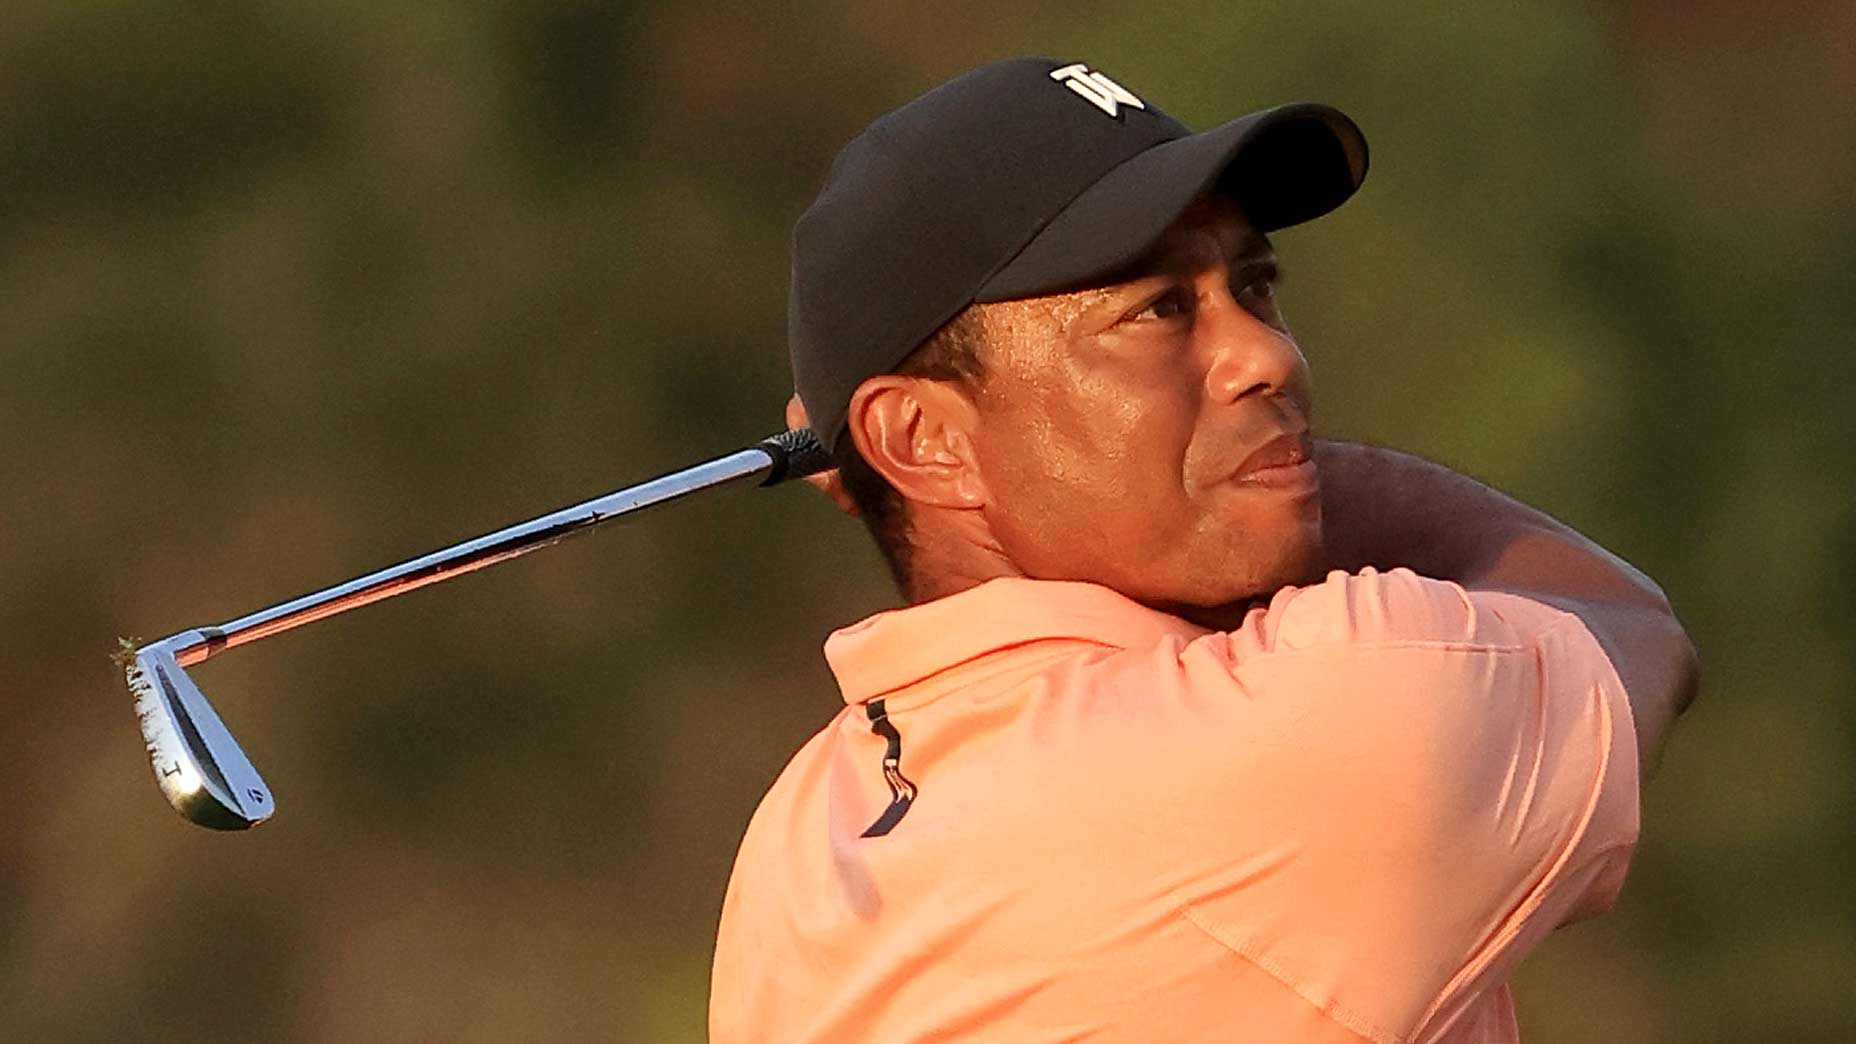 He already told me': Lee Trevino knows when Tiger Woods will play next